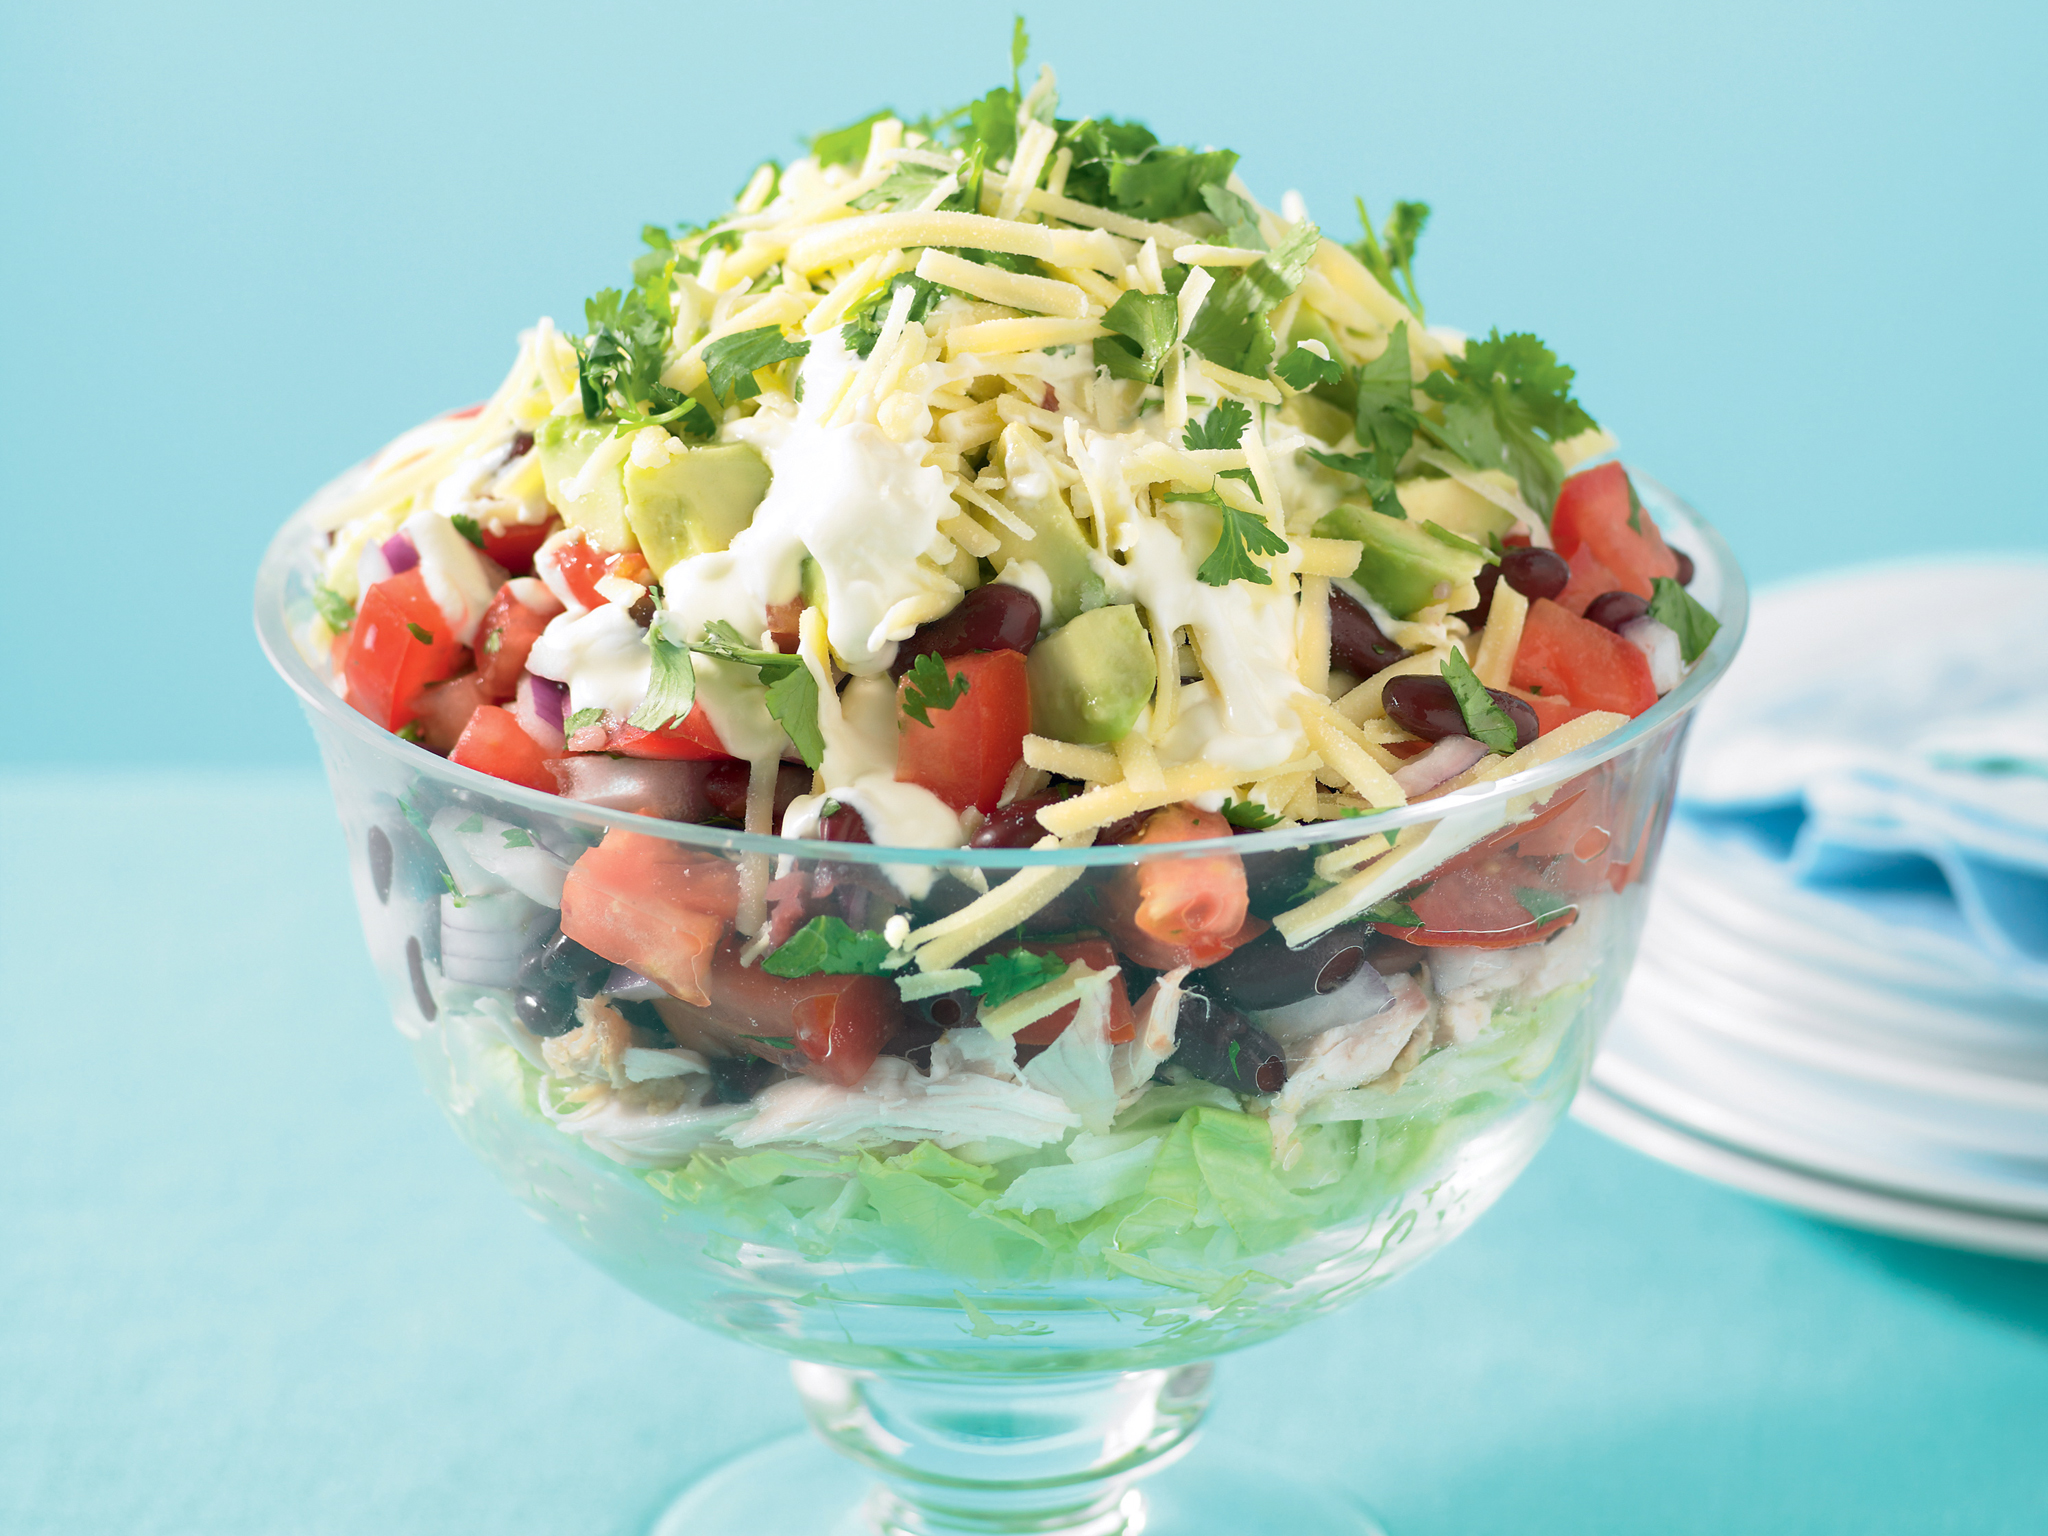 Pantry Standbys beans - Open a can - Mexican Layered Salad